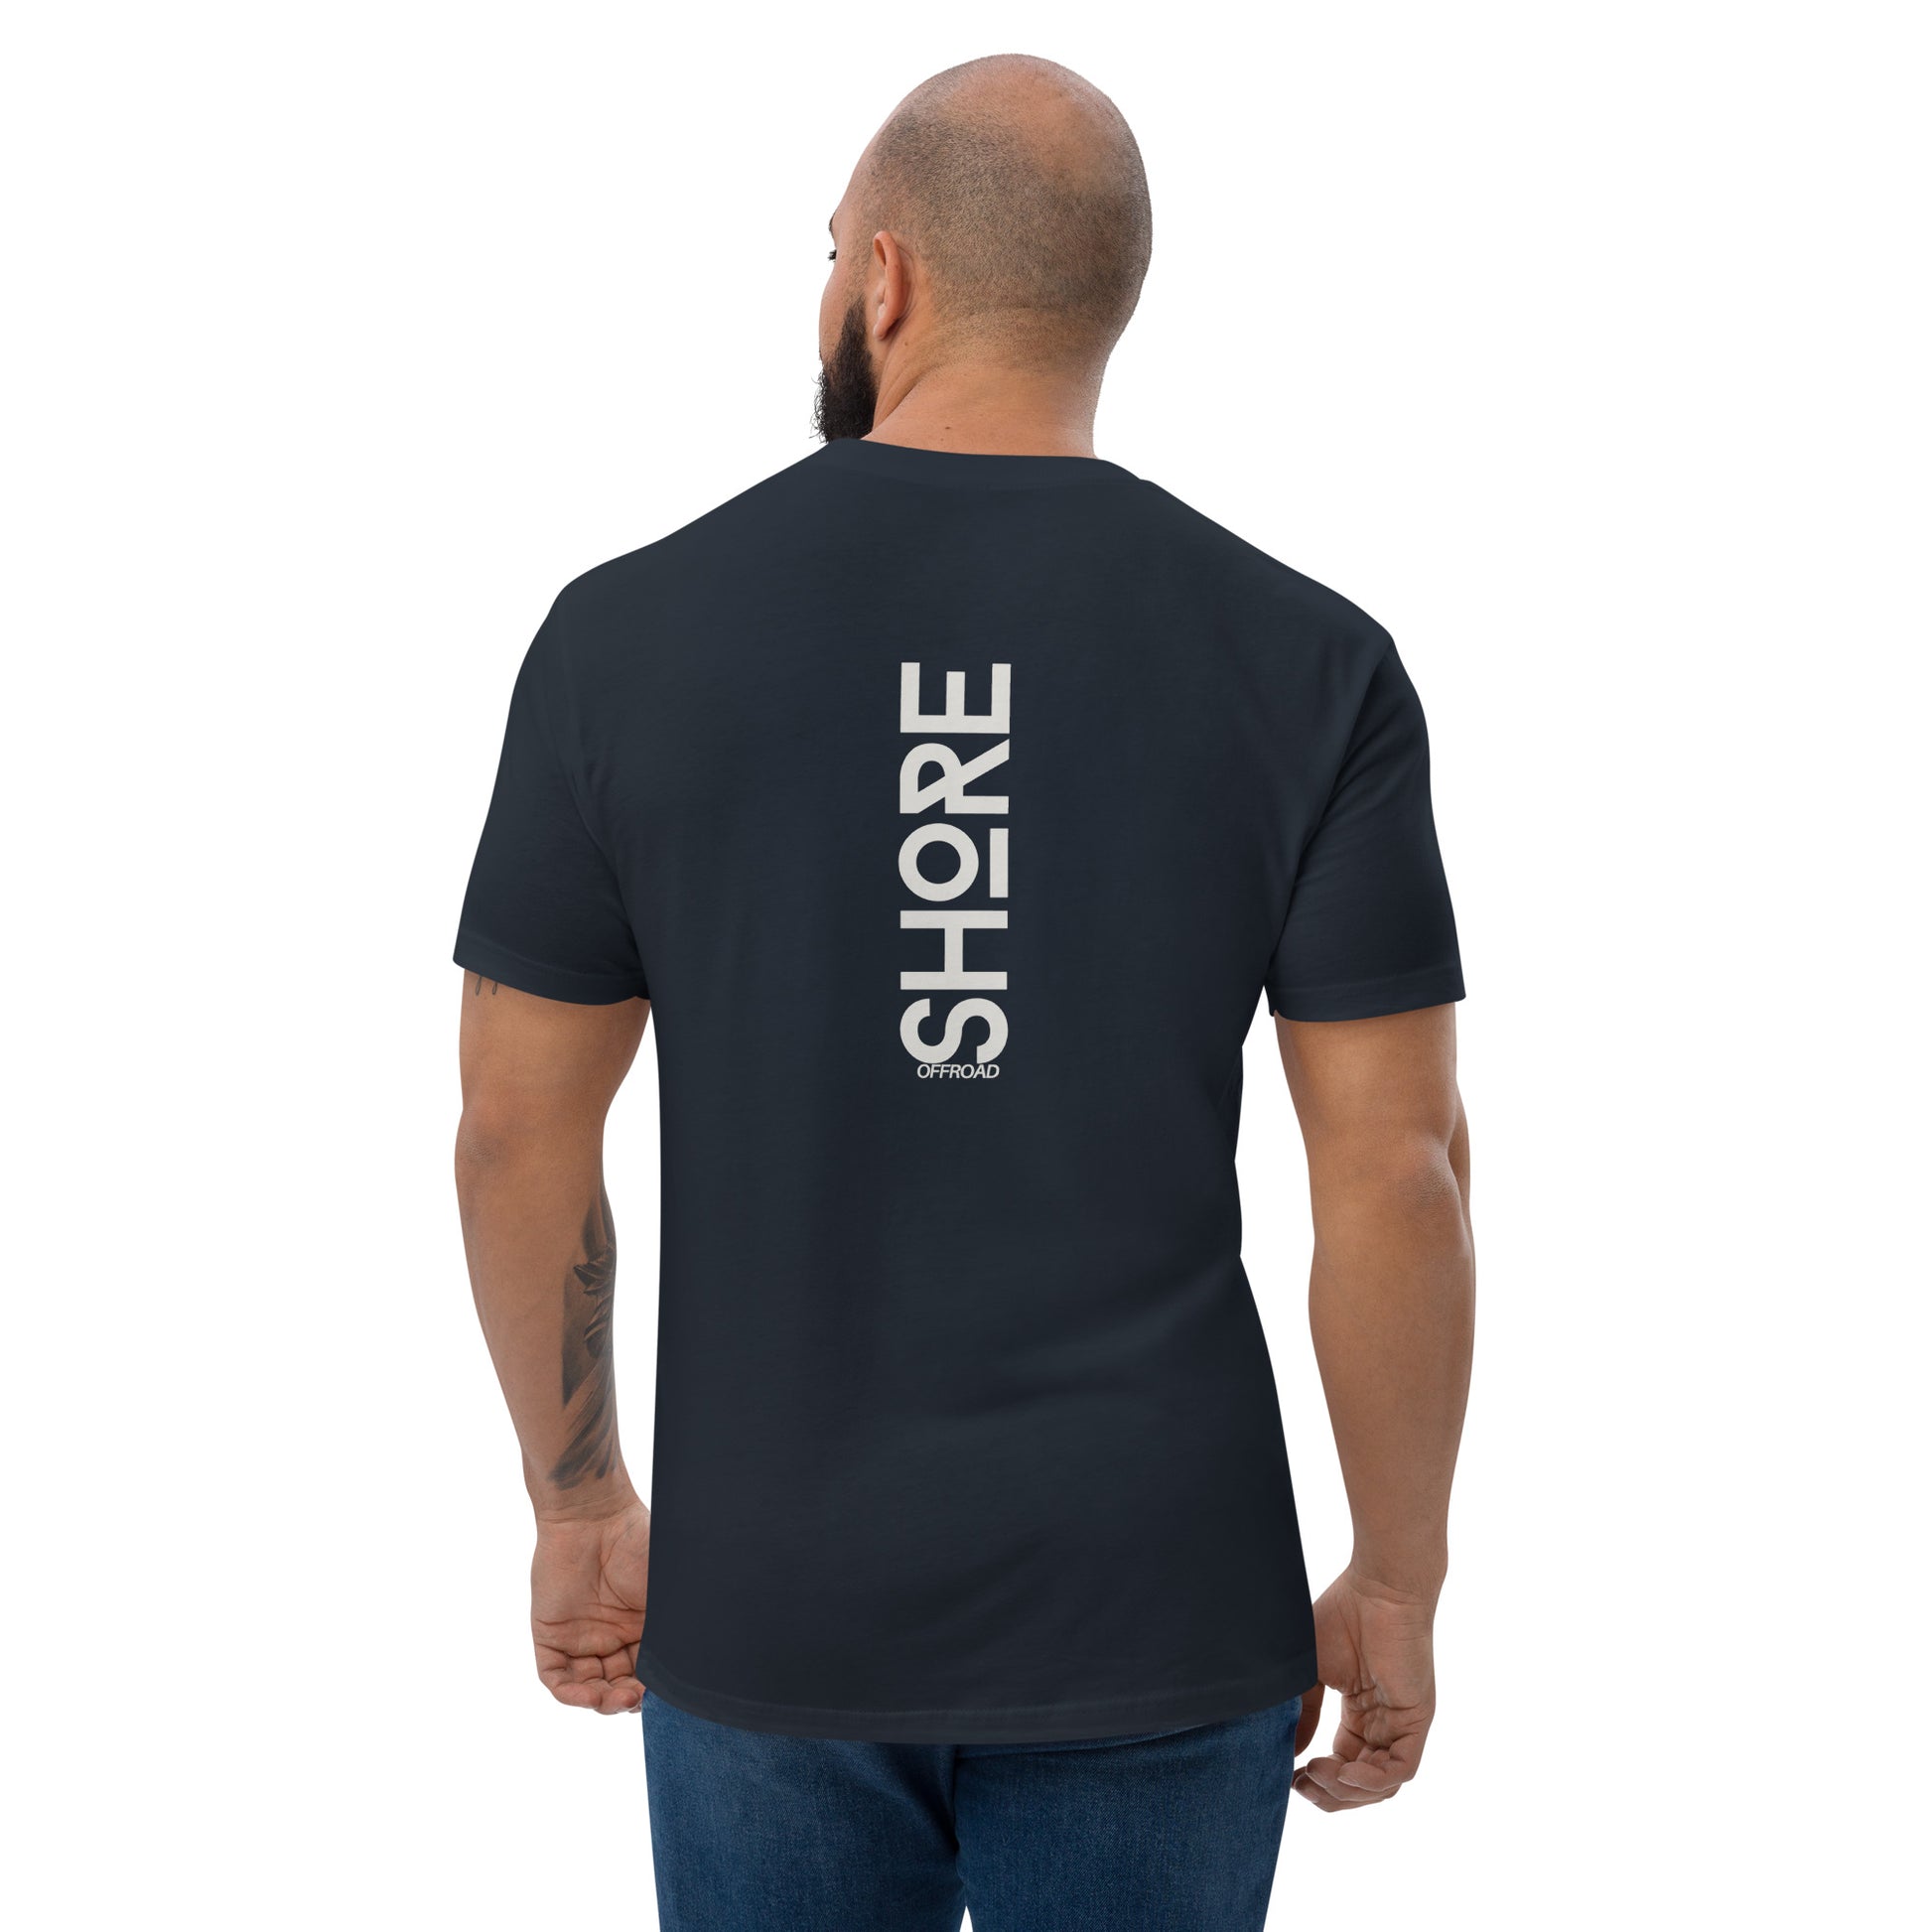 a man wearing a black shirt with the words store on it